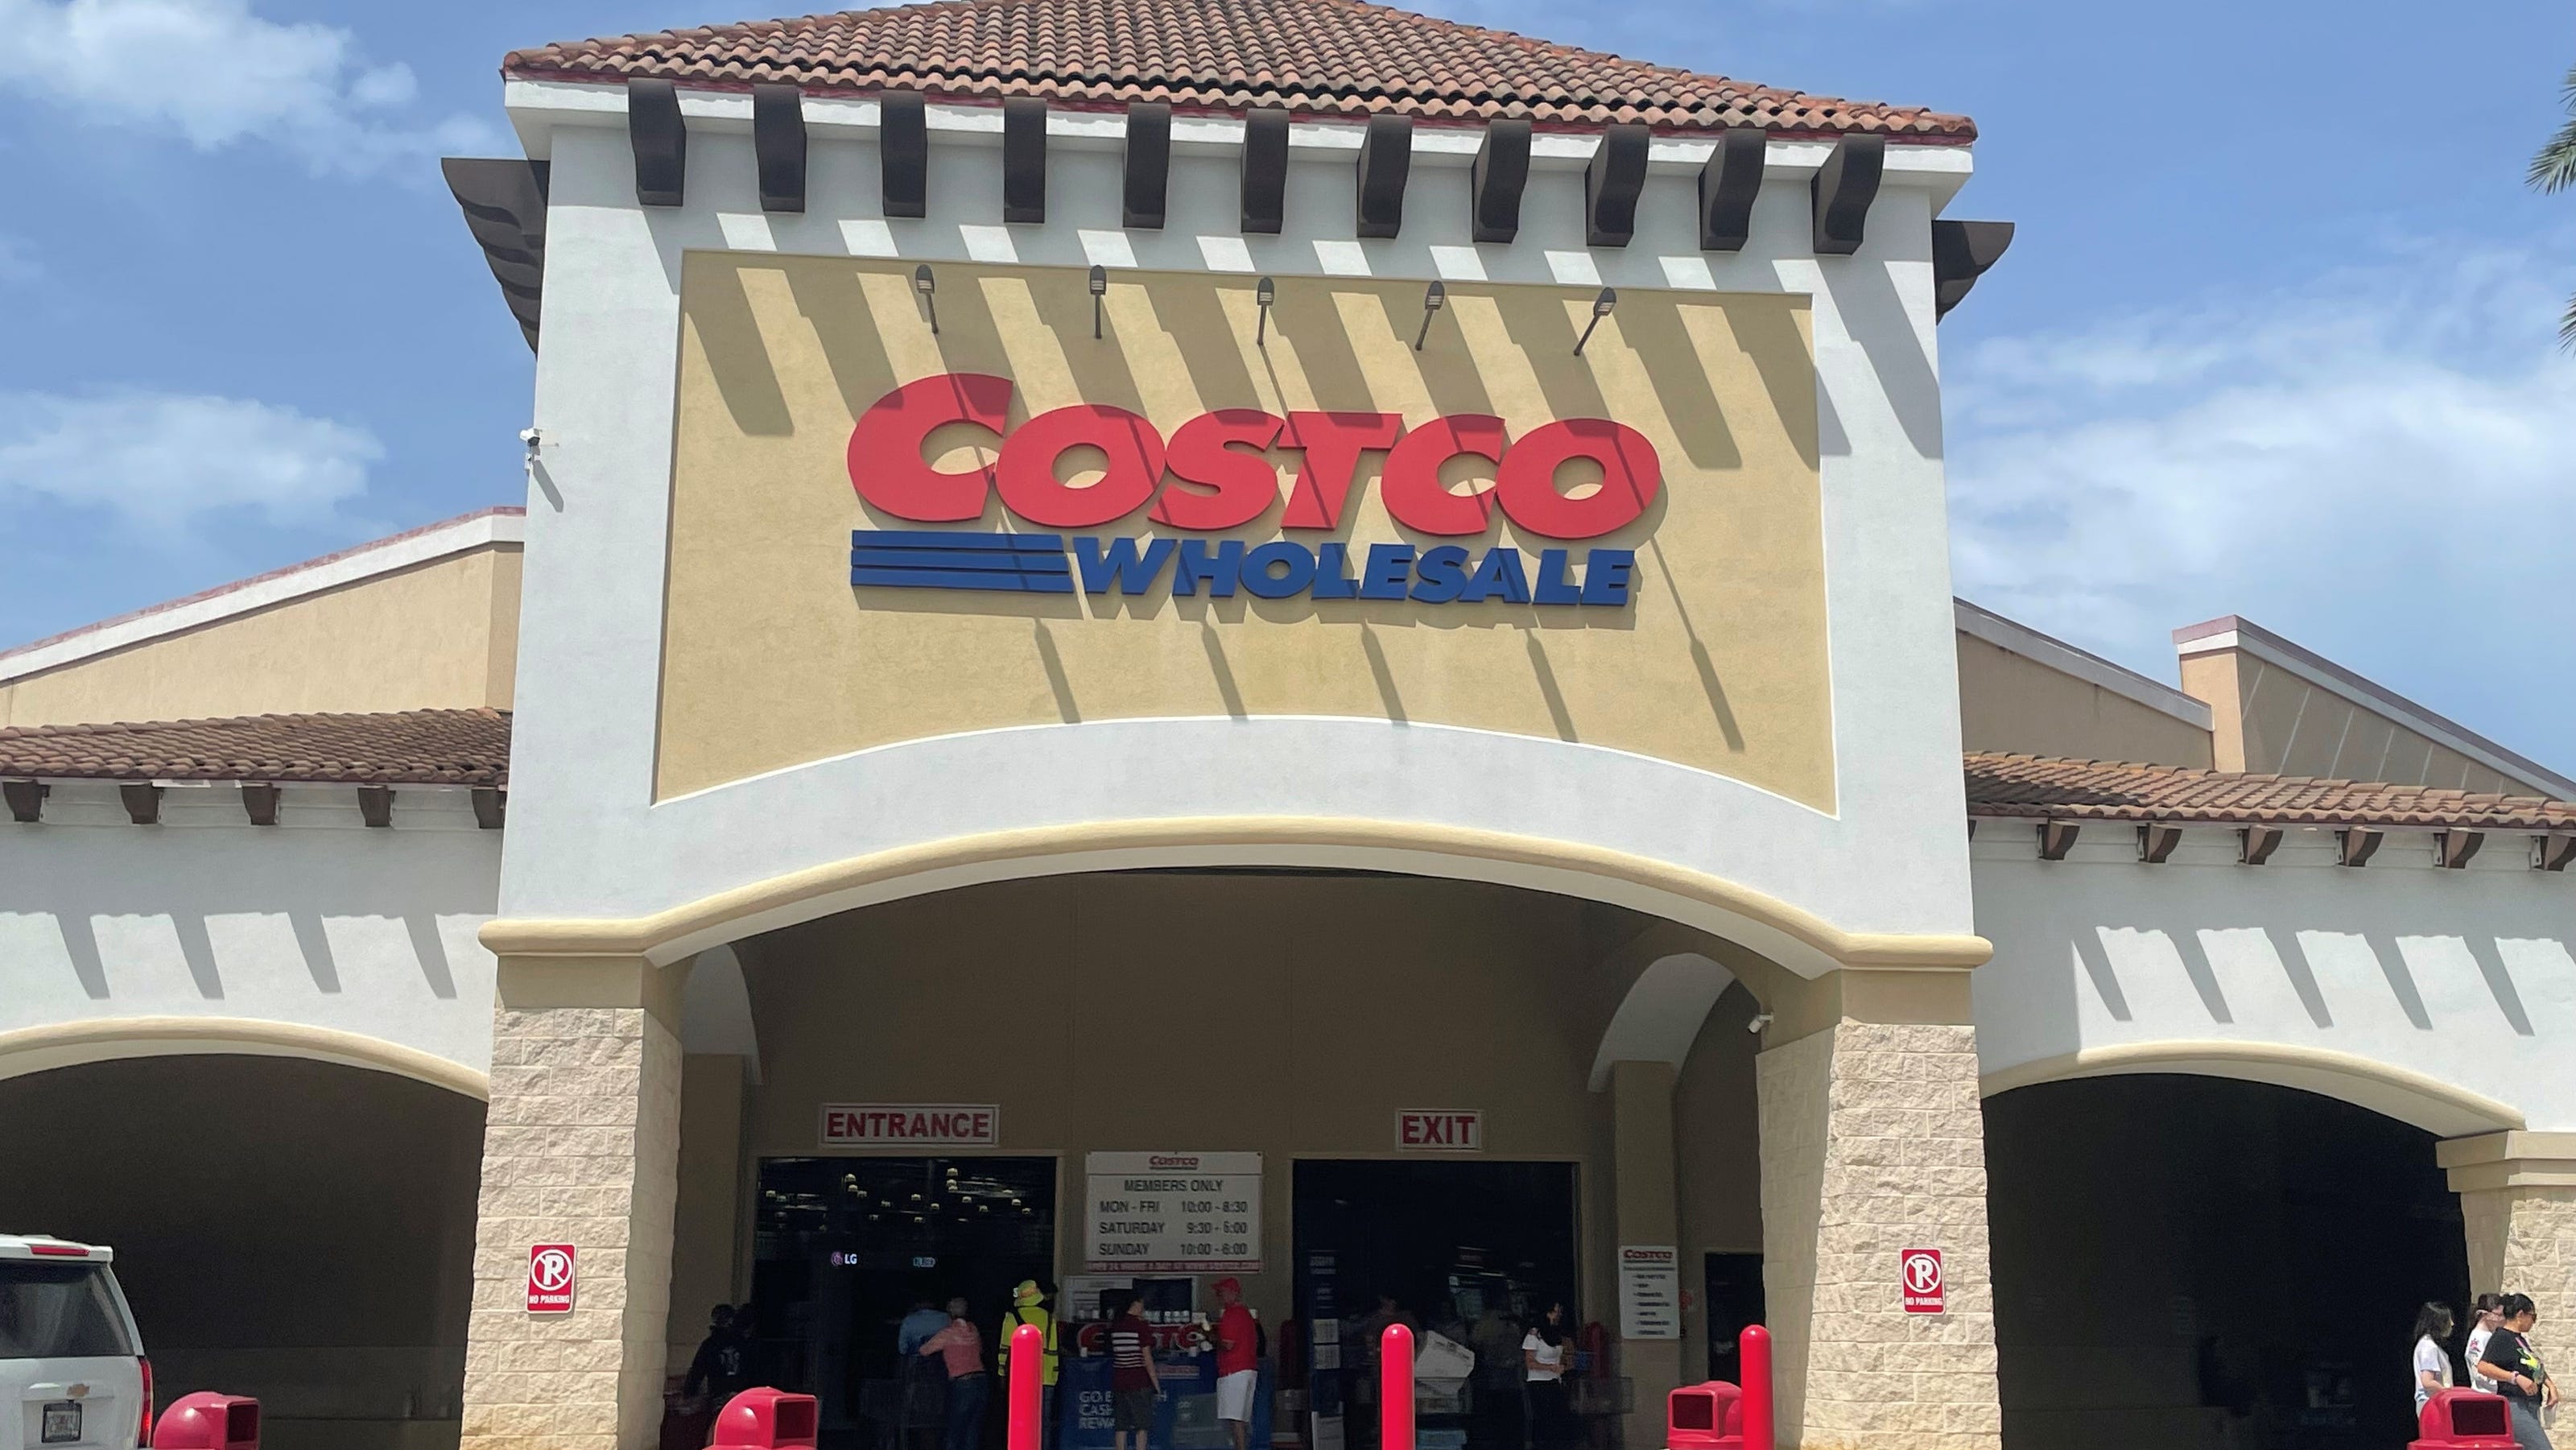 Costco hours: COVID-19 senior hours to end July 26 at warehouse clubs